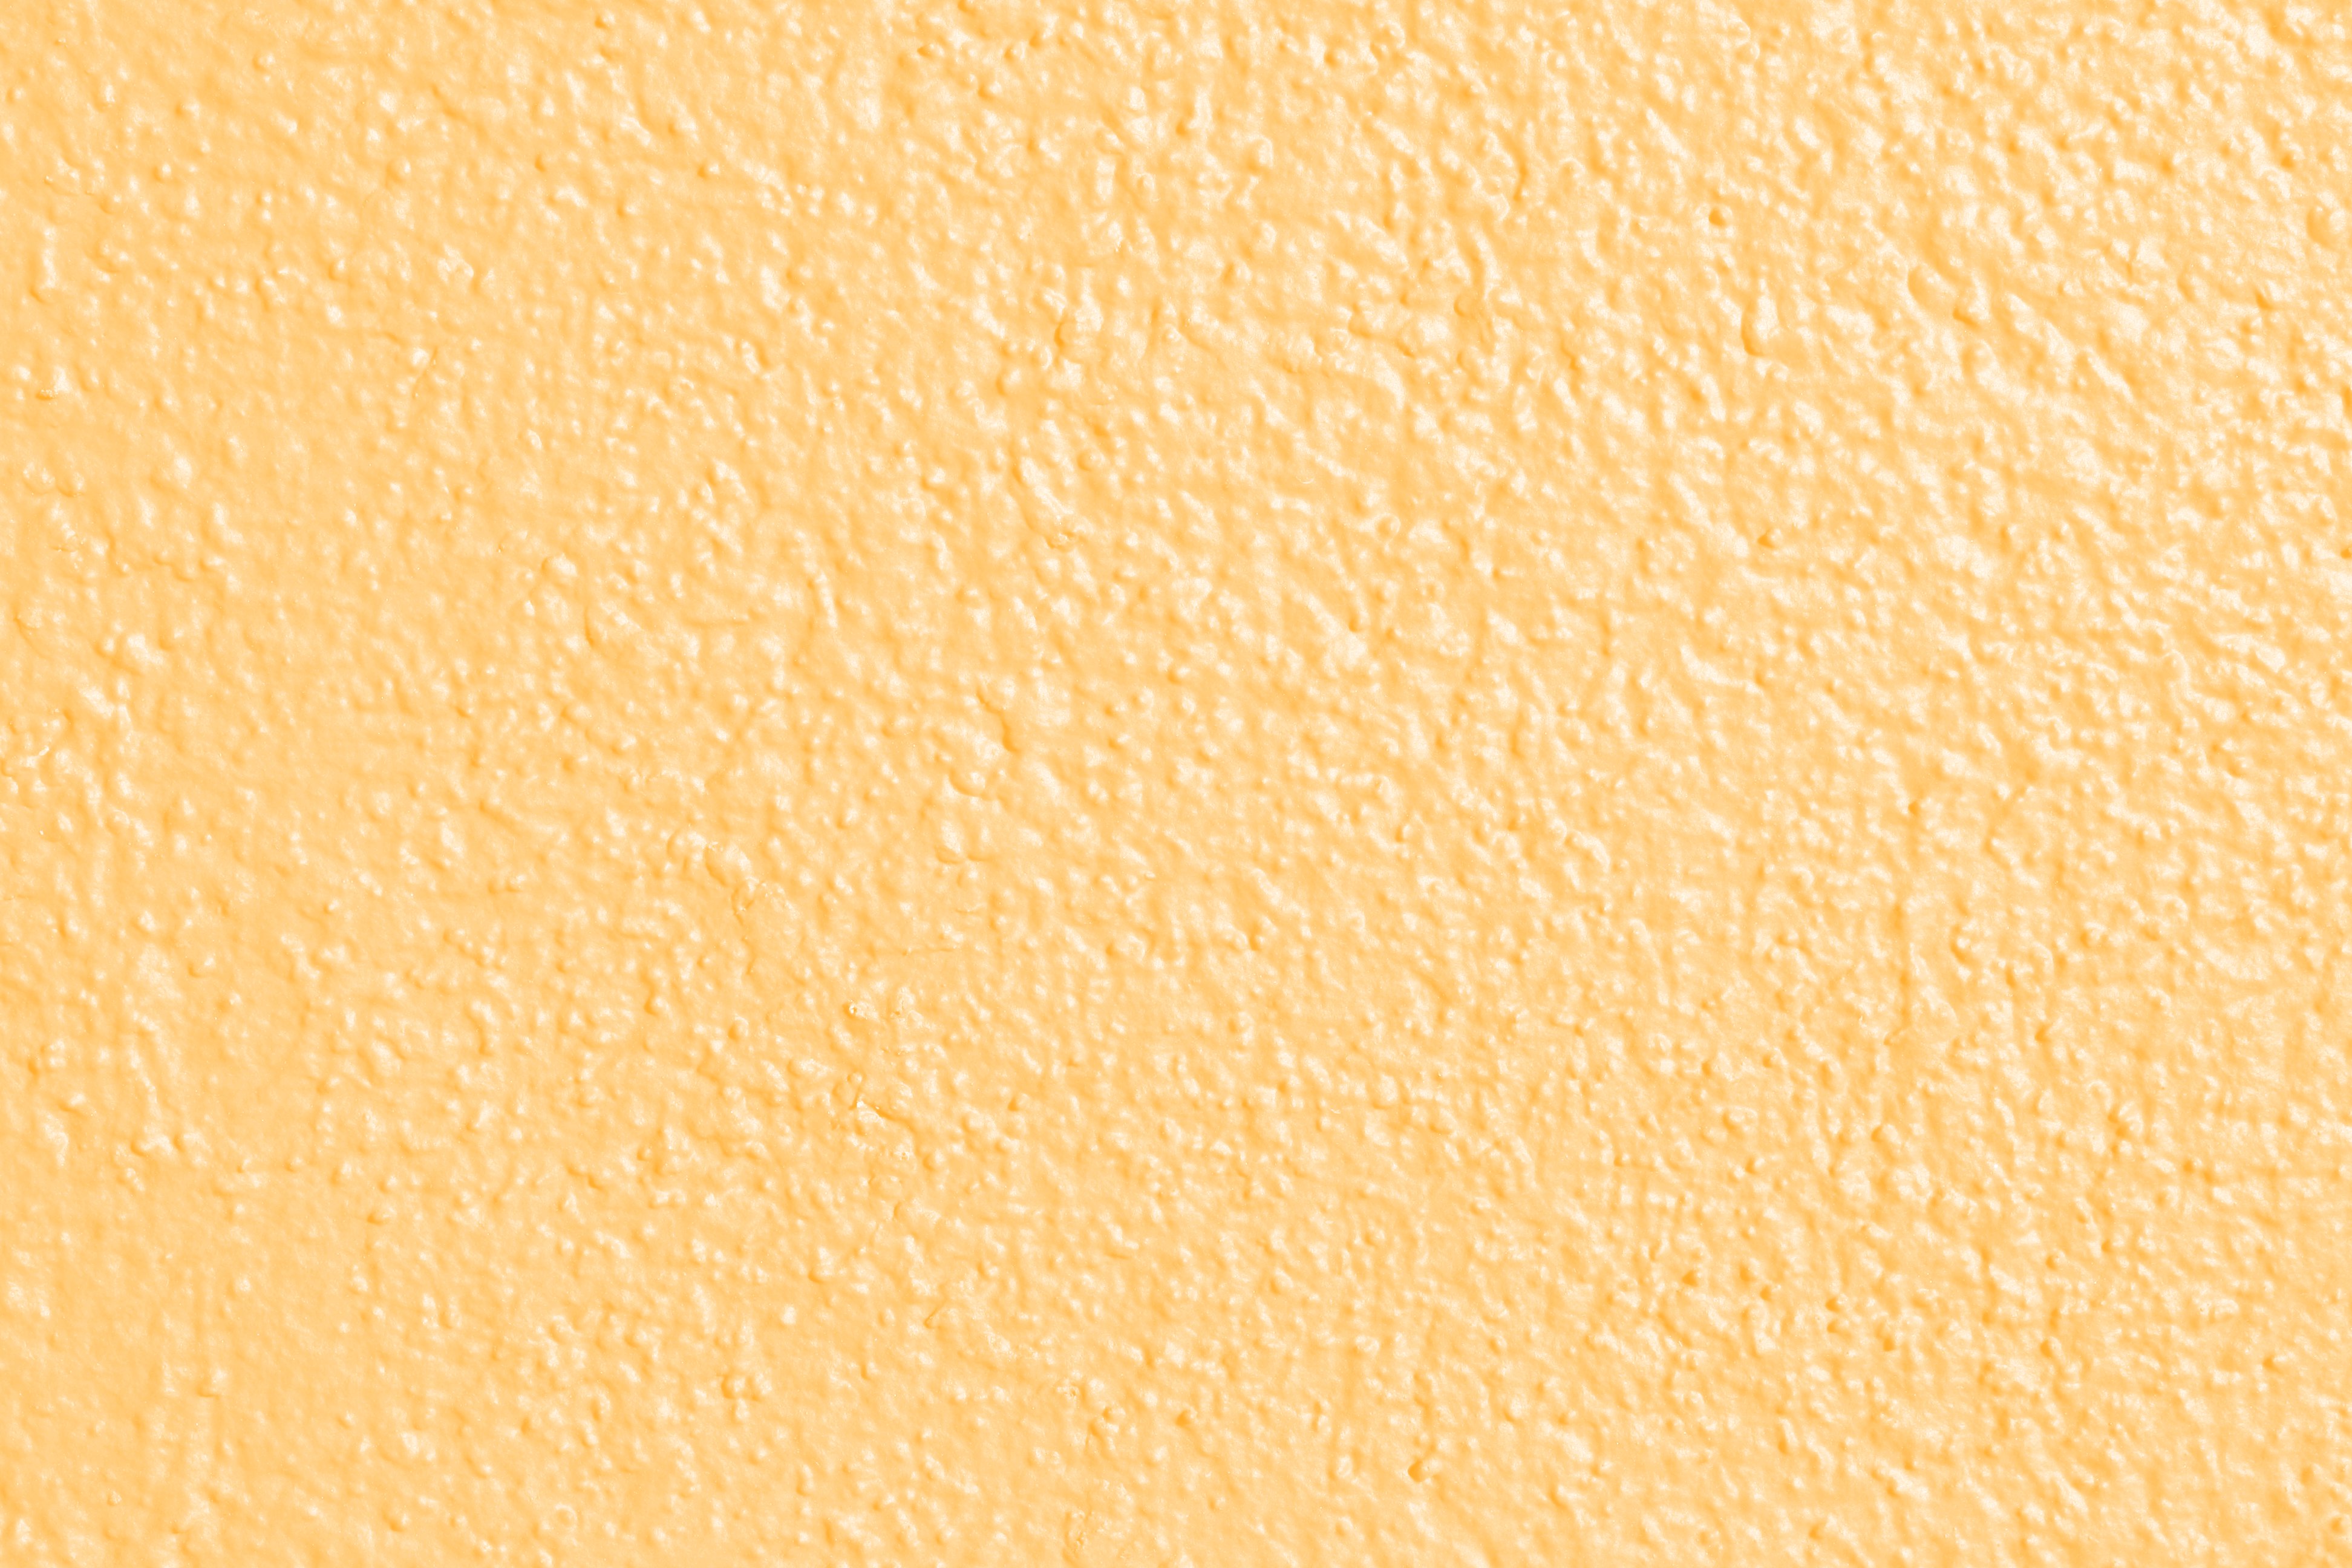 Peach or Light Orange Colored Painted Wall Texture Picture | Free  Photograph | Photos Public Domain